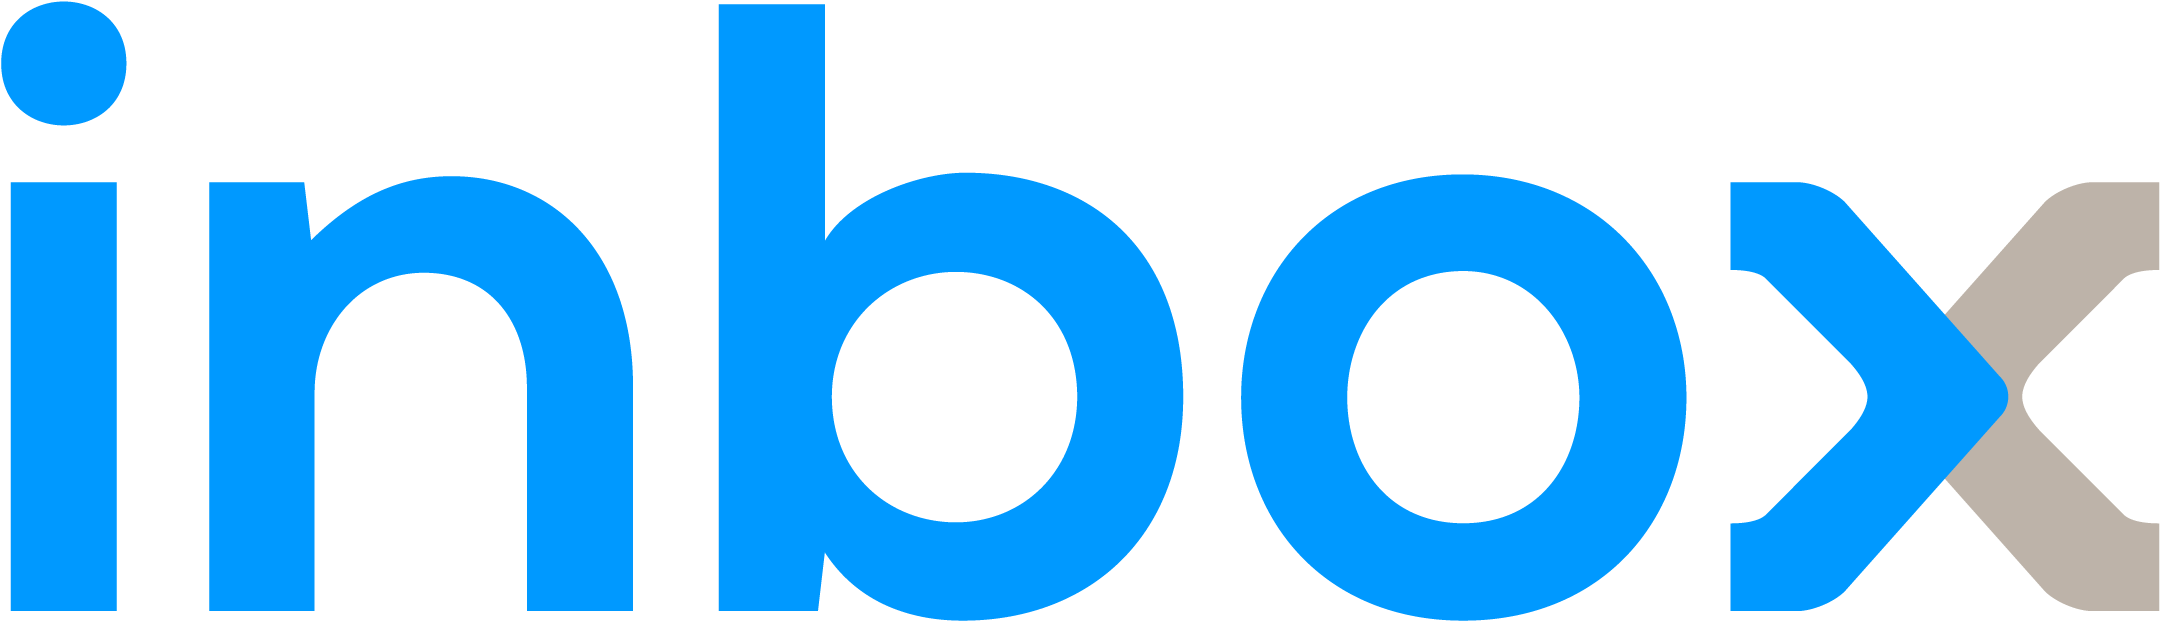 A Blue Letters On A Black Background